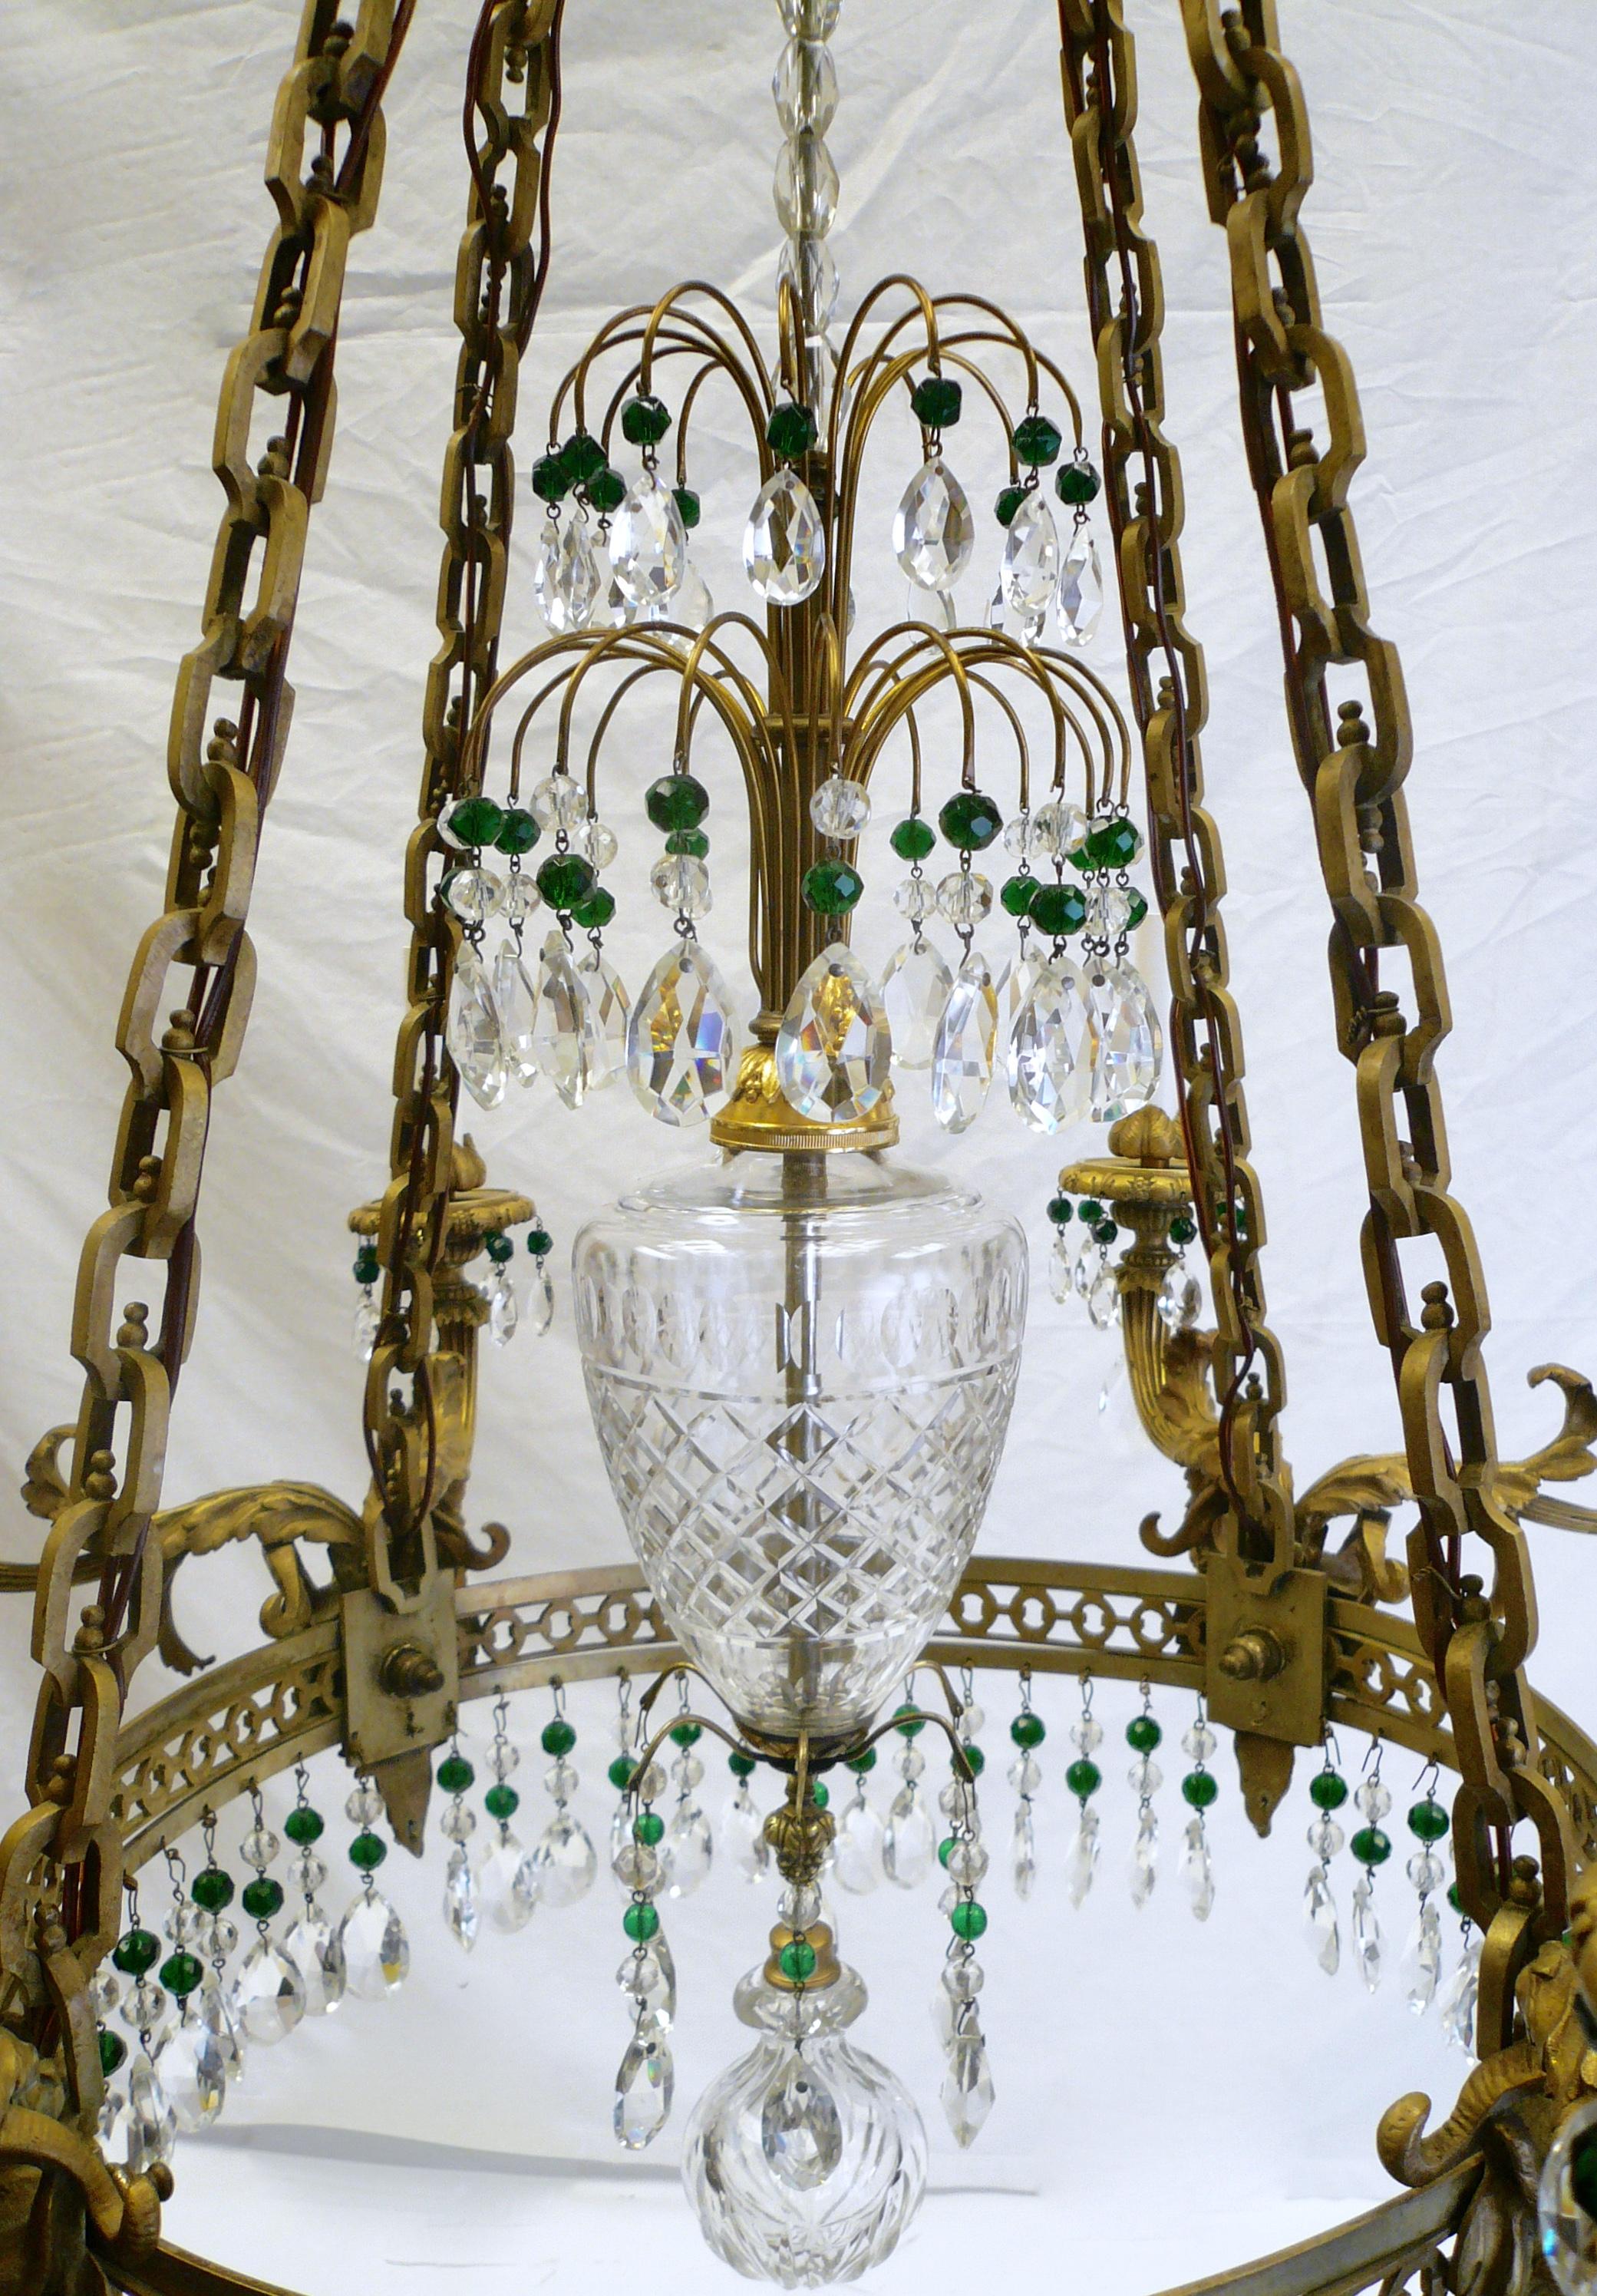 This eight light Alexander I style chandelier features pear shaped faceted crystals, and emerald green crystal accents. The gilt bronze frame features neoclassical motifs including acanthus leaves and rams heads.